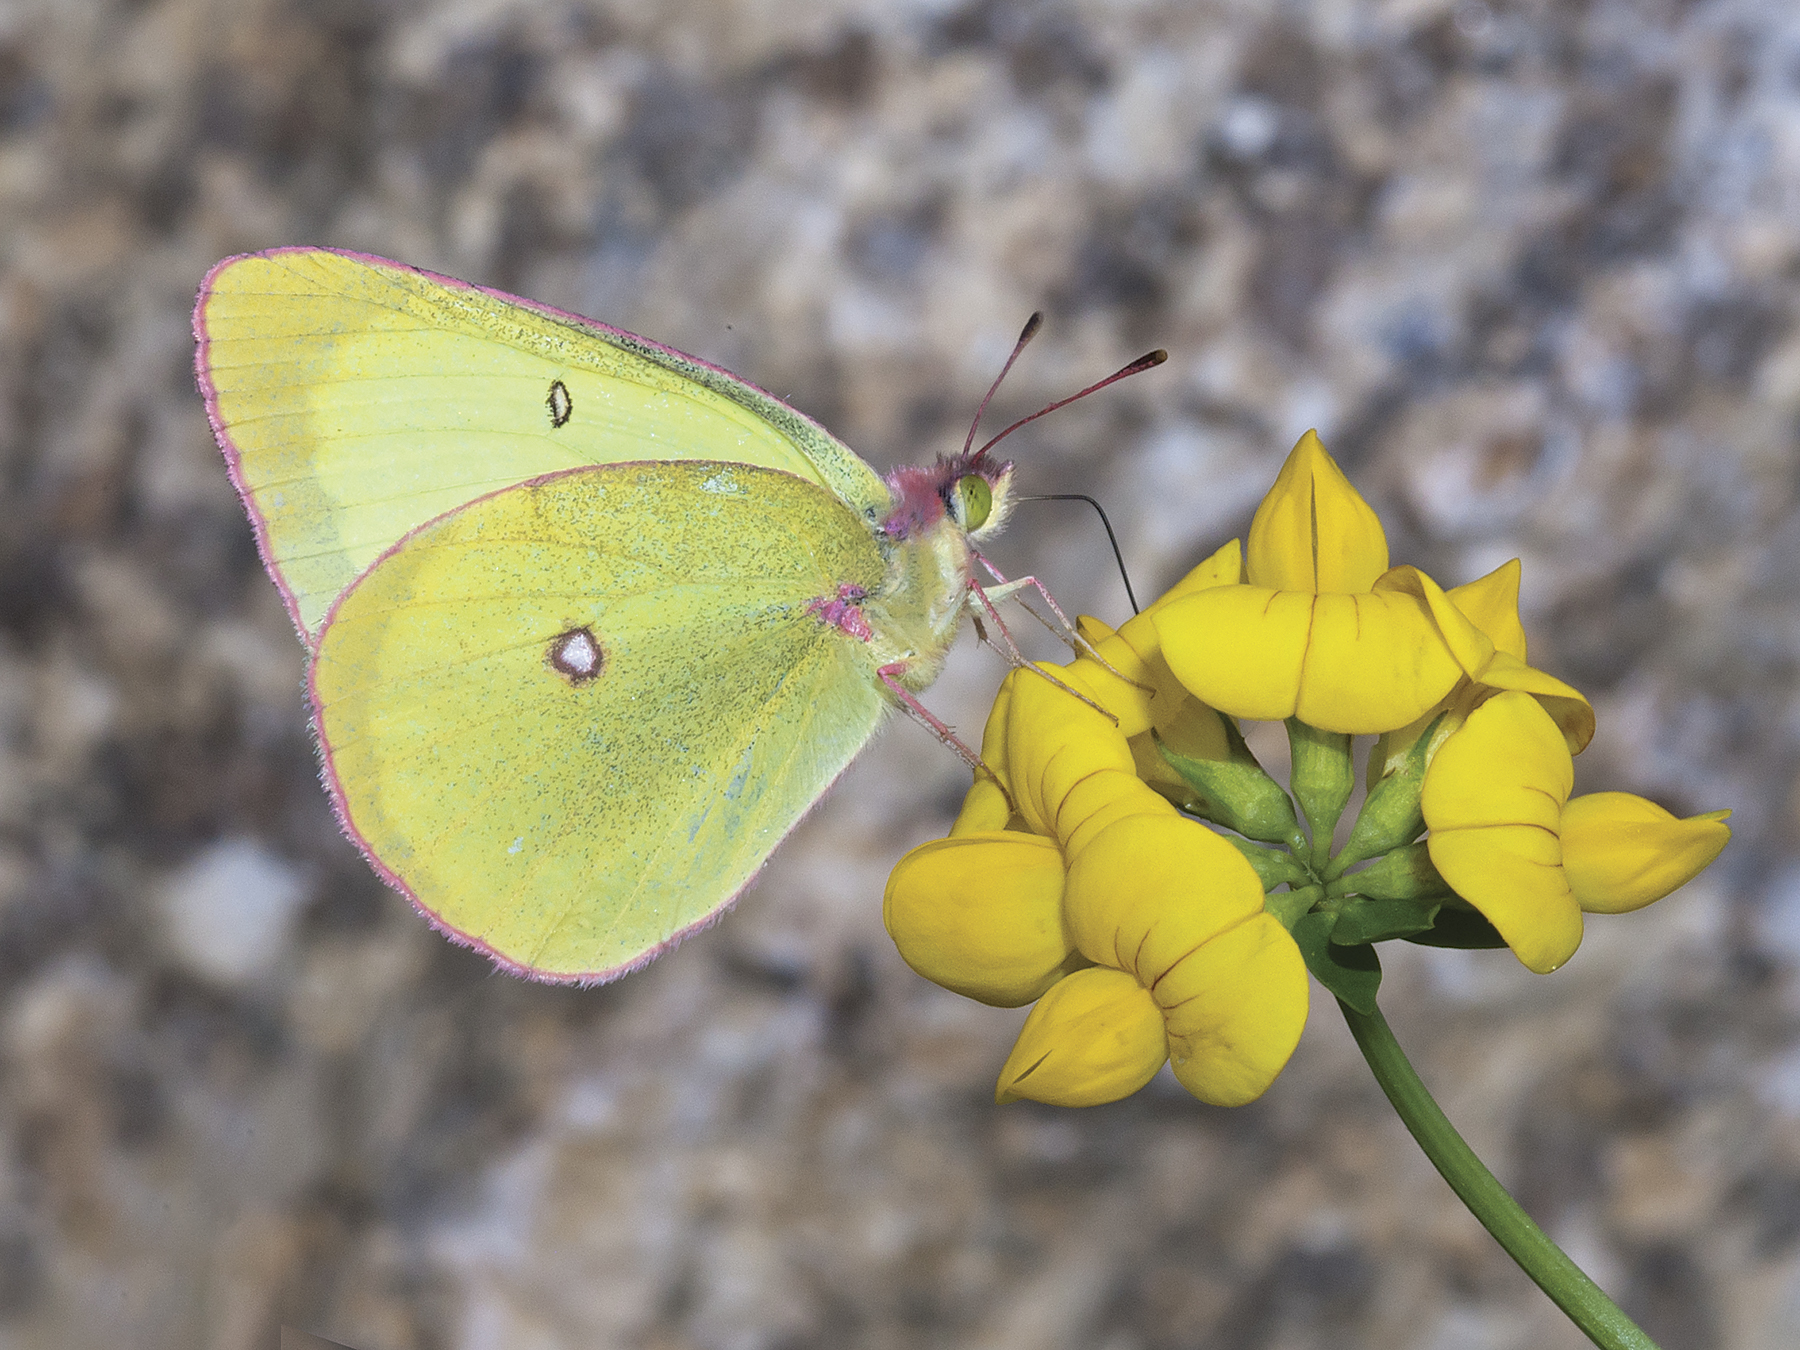 Pink-edged Sulphur Butterfly photo by Bryan Pfeiffer